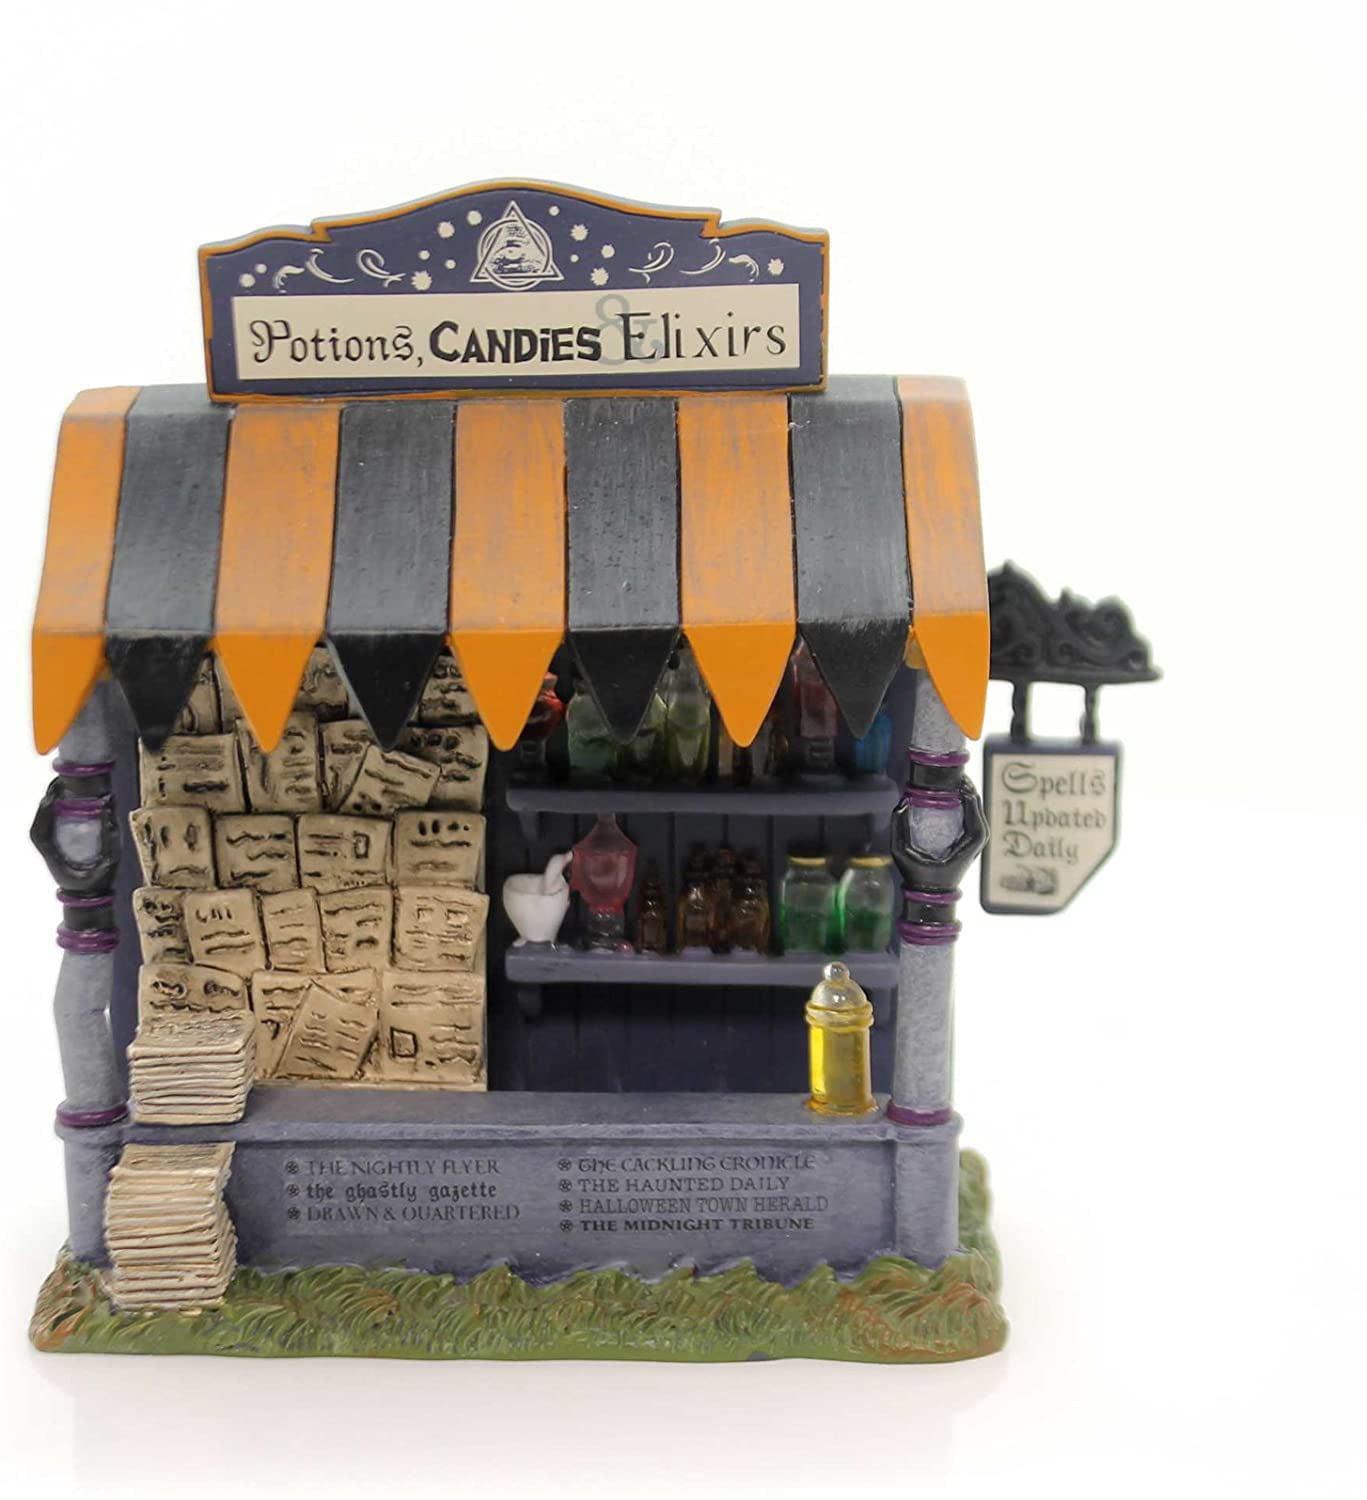 Department 56 Accessories for Villages Halloween Spells and Potions Kiosk Accessory 